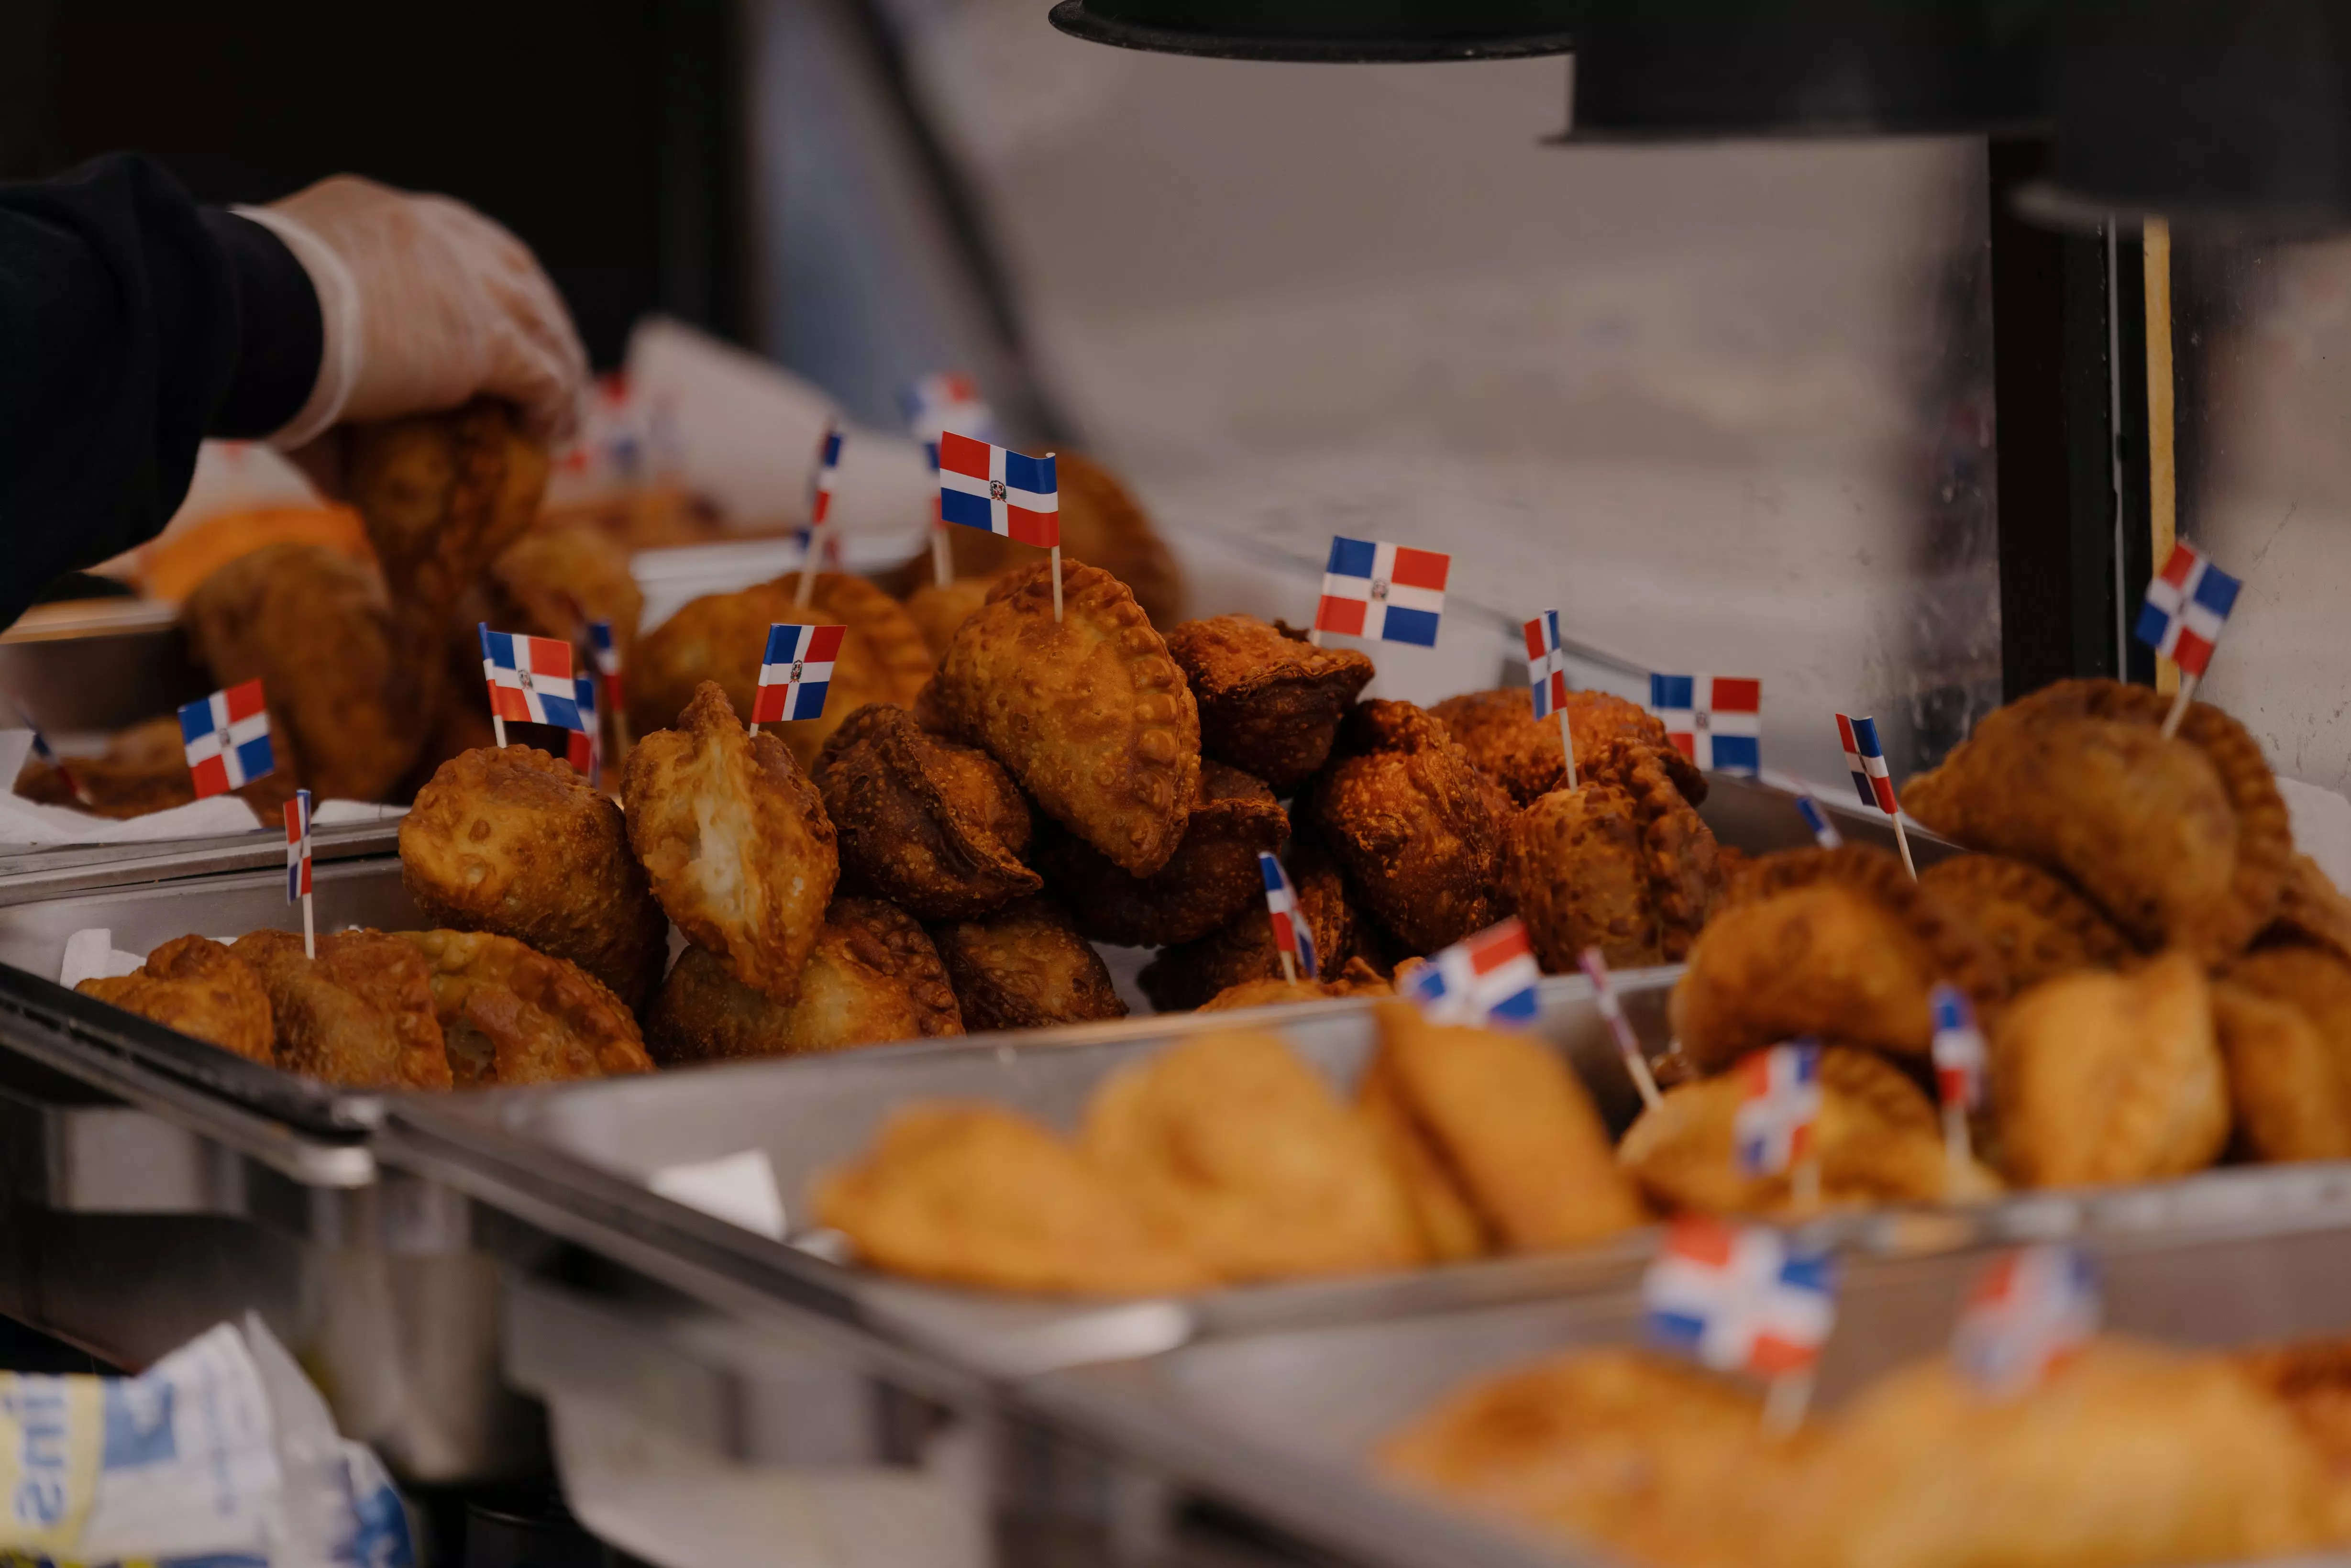 Assortment of empanadas with Dominican flags on toothpicks on each one.